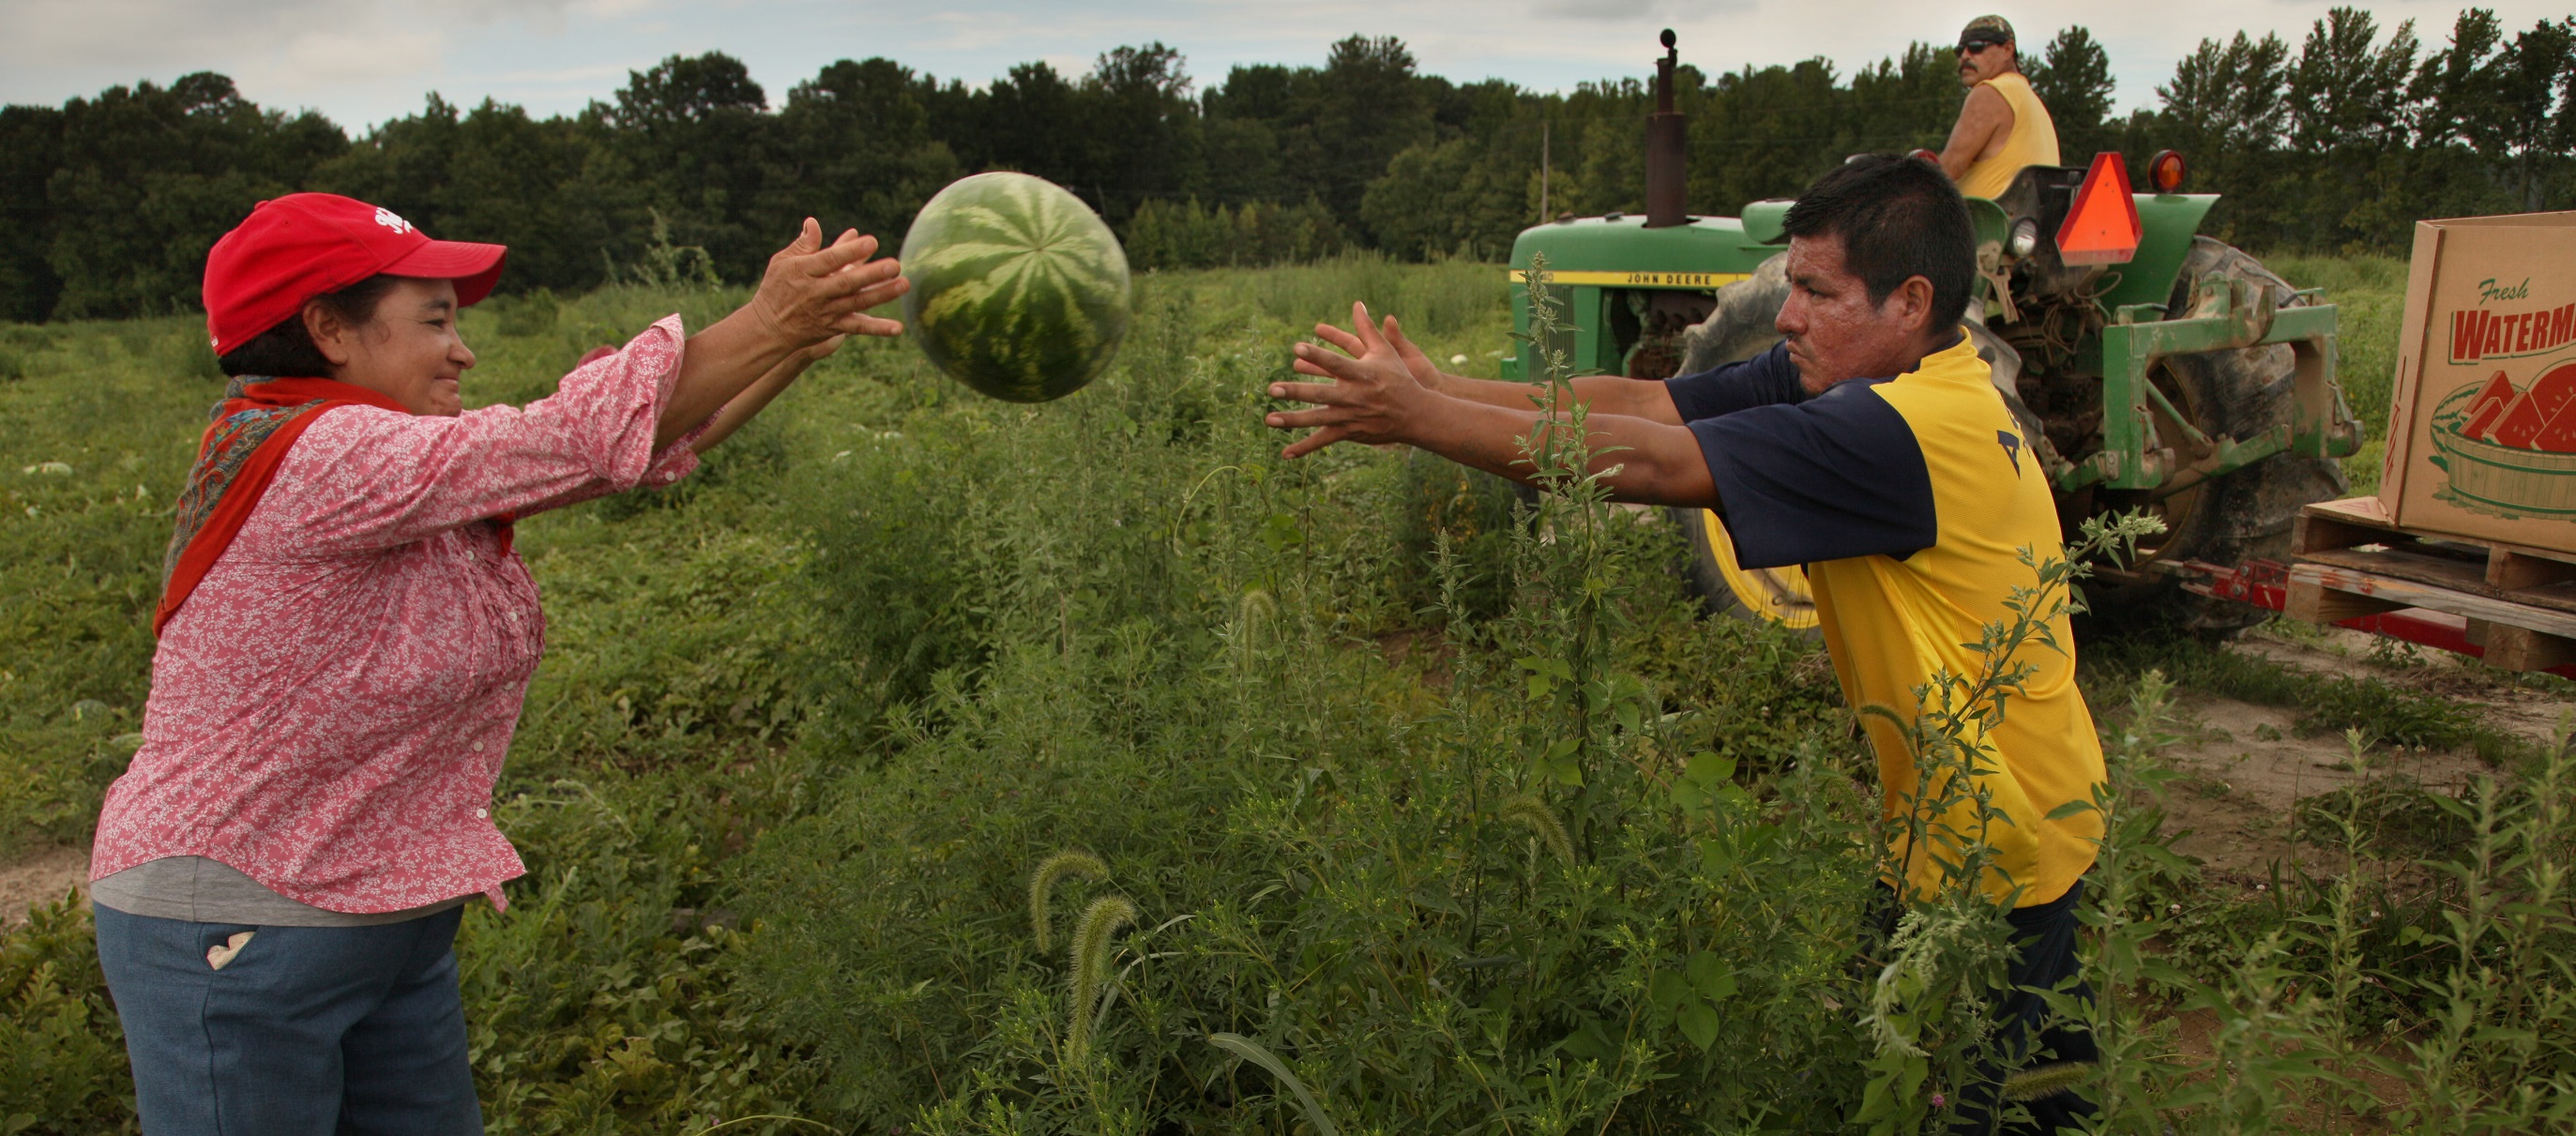 Farmworkers in Denton, MD toss watermelons across rows to fill bins pulled by a tractor